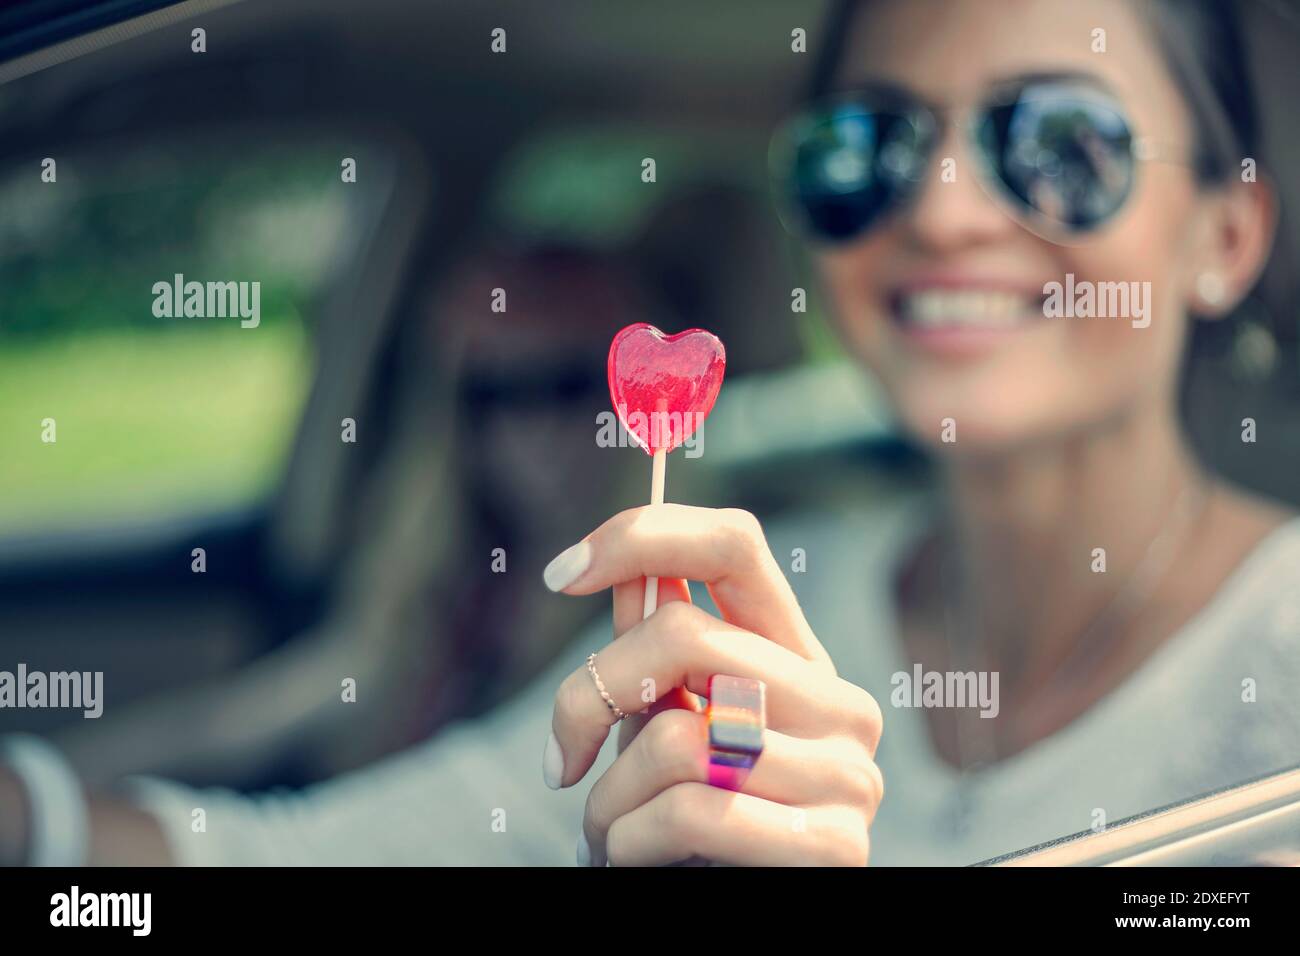 Happy young woman showing heart shape lollipop during road trip Stock Photo